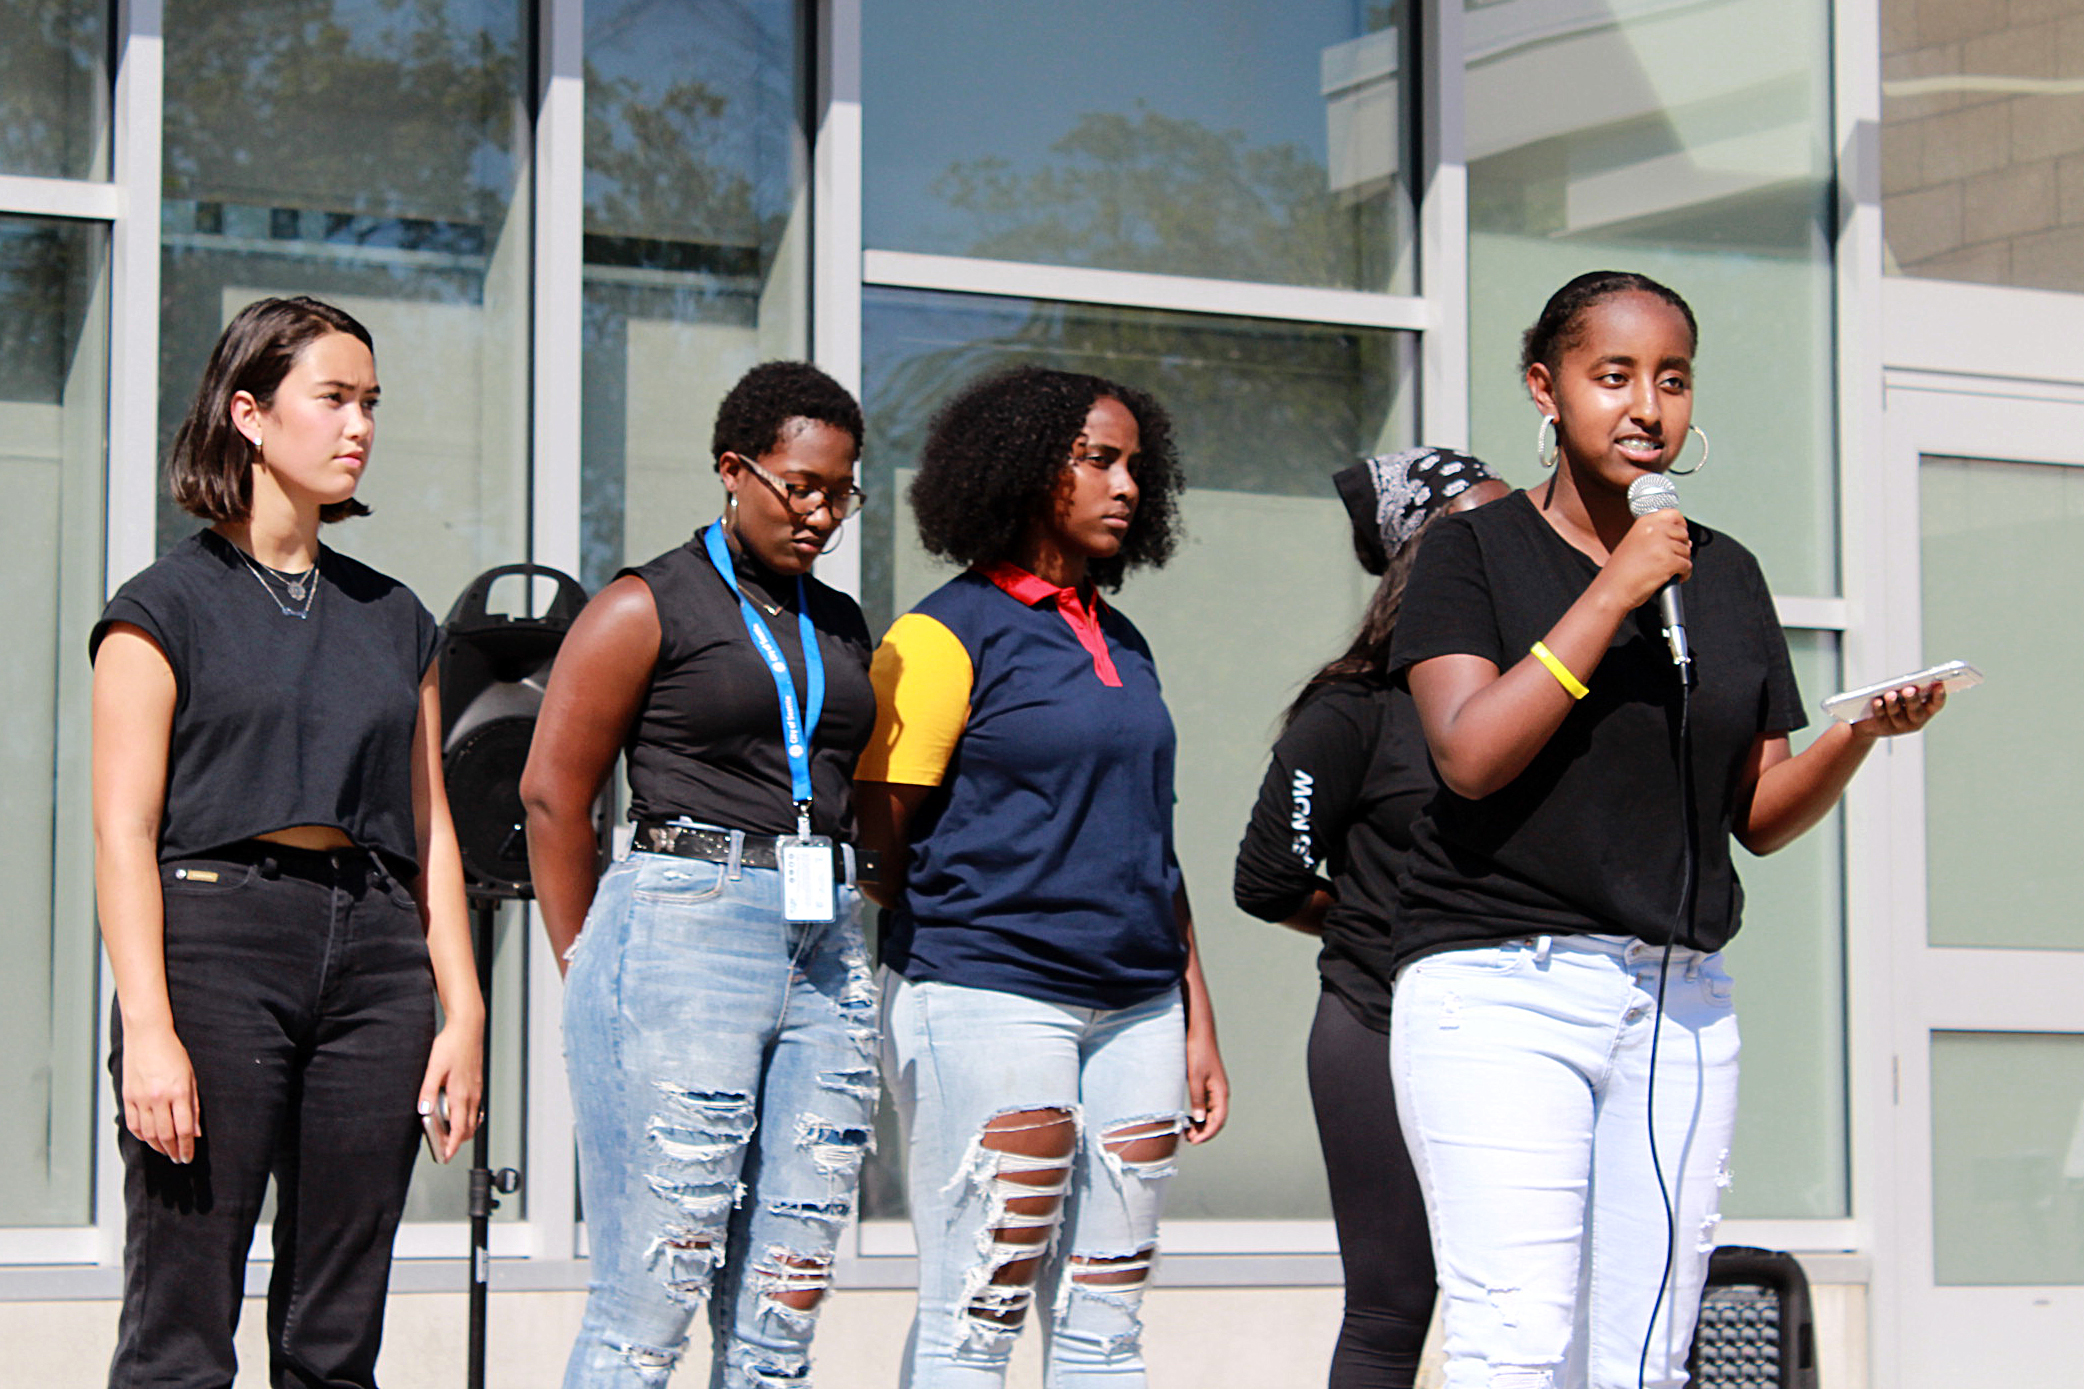 Students from Seattle Public Schools and student allies from other districts speak at a rally at the Rainier Beach Community Center on September 4. Pictured from left to right: Davie Ross, Angelina Riley, Kidist Habte and Betty Mekonnen.